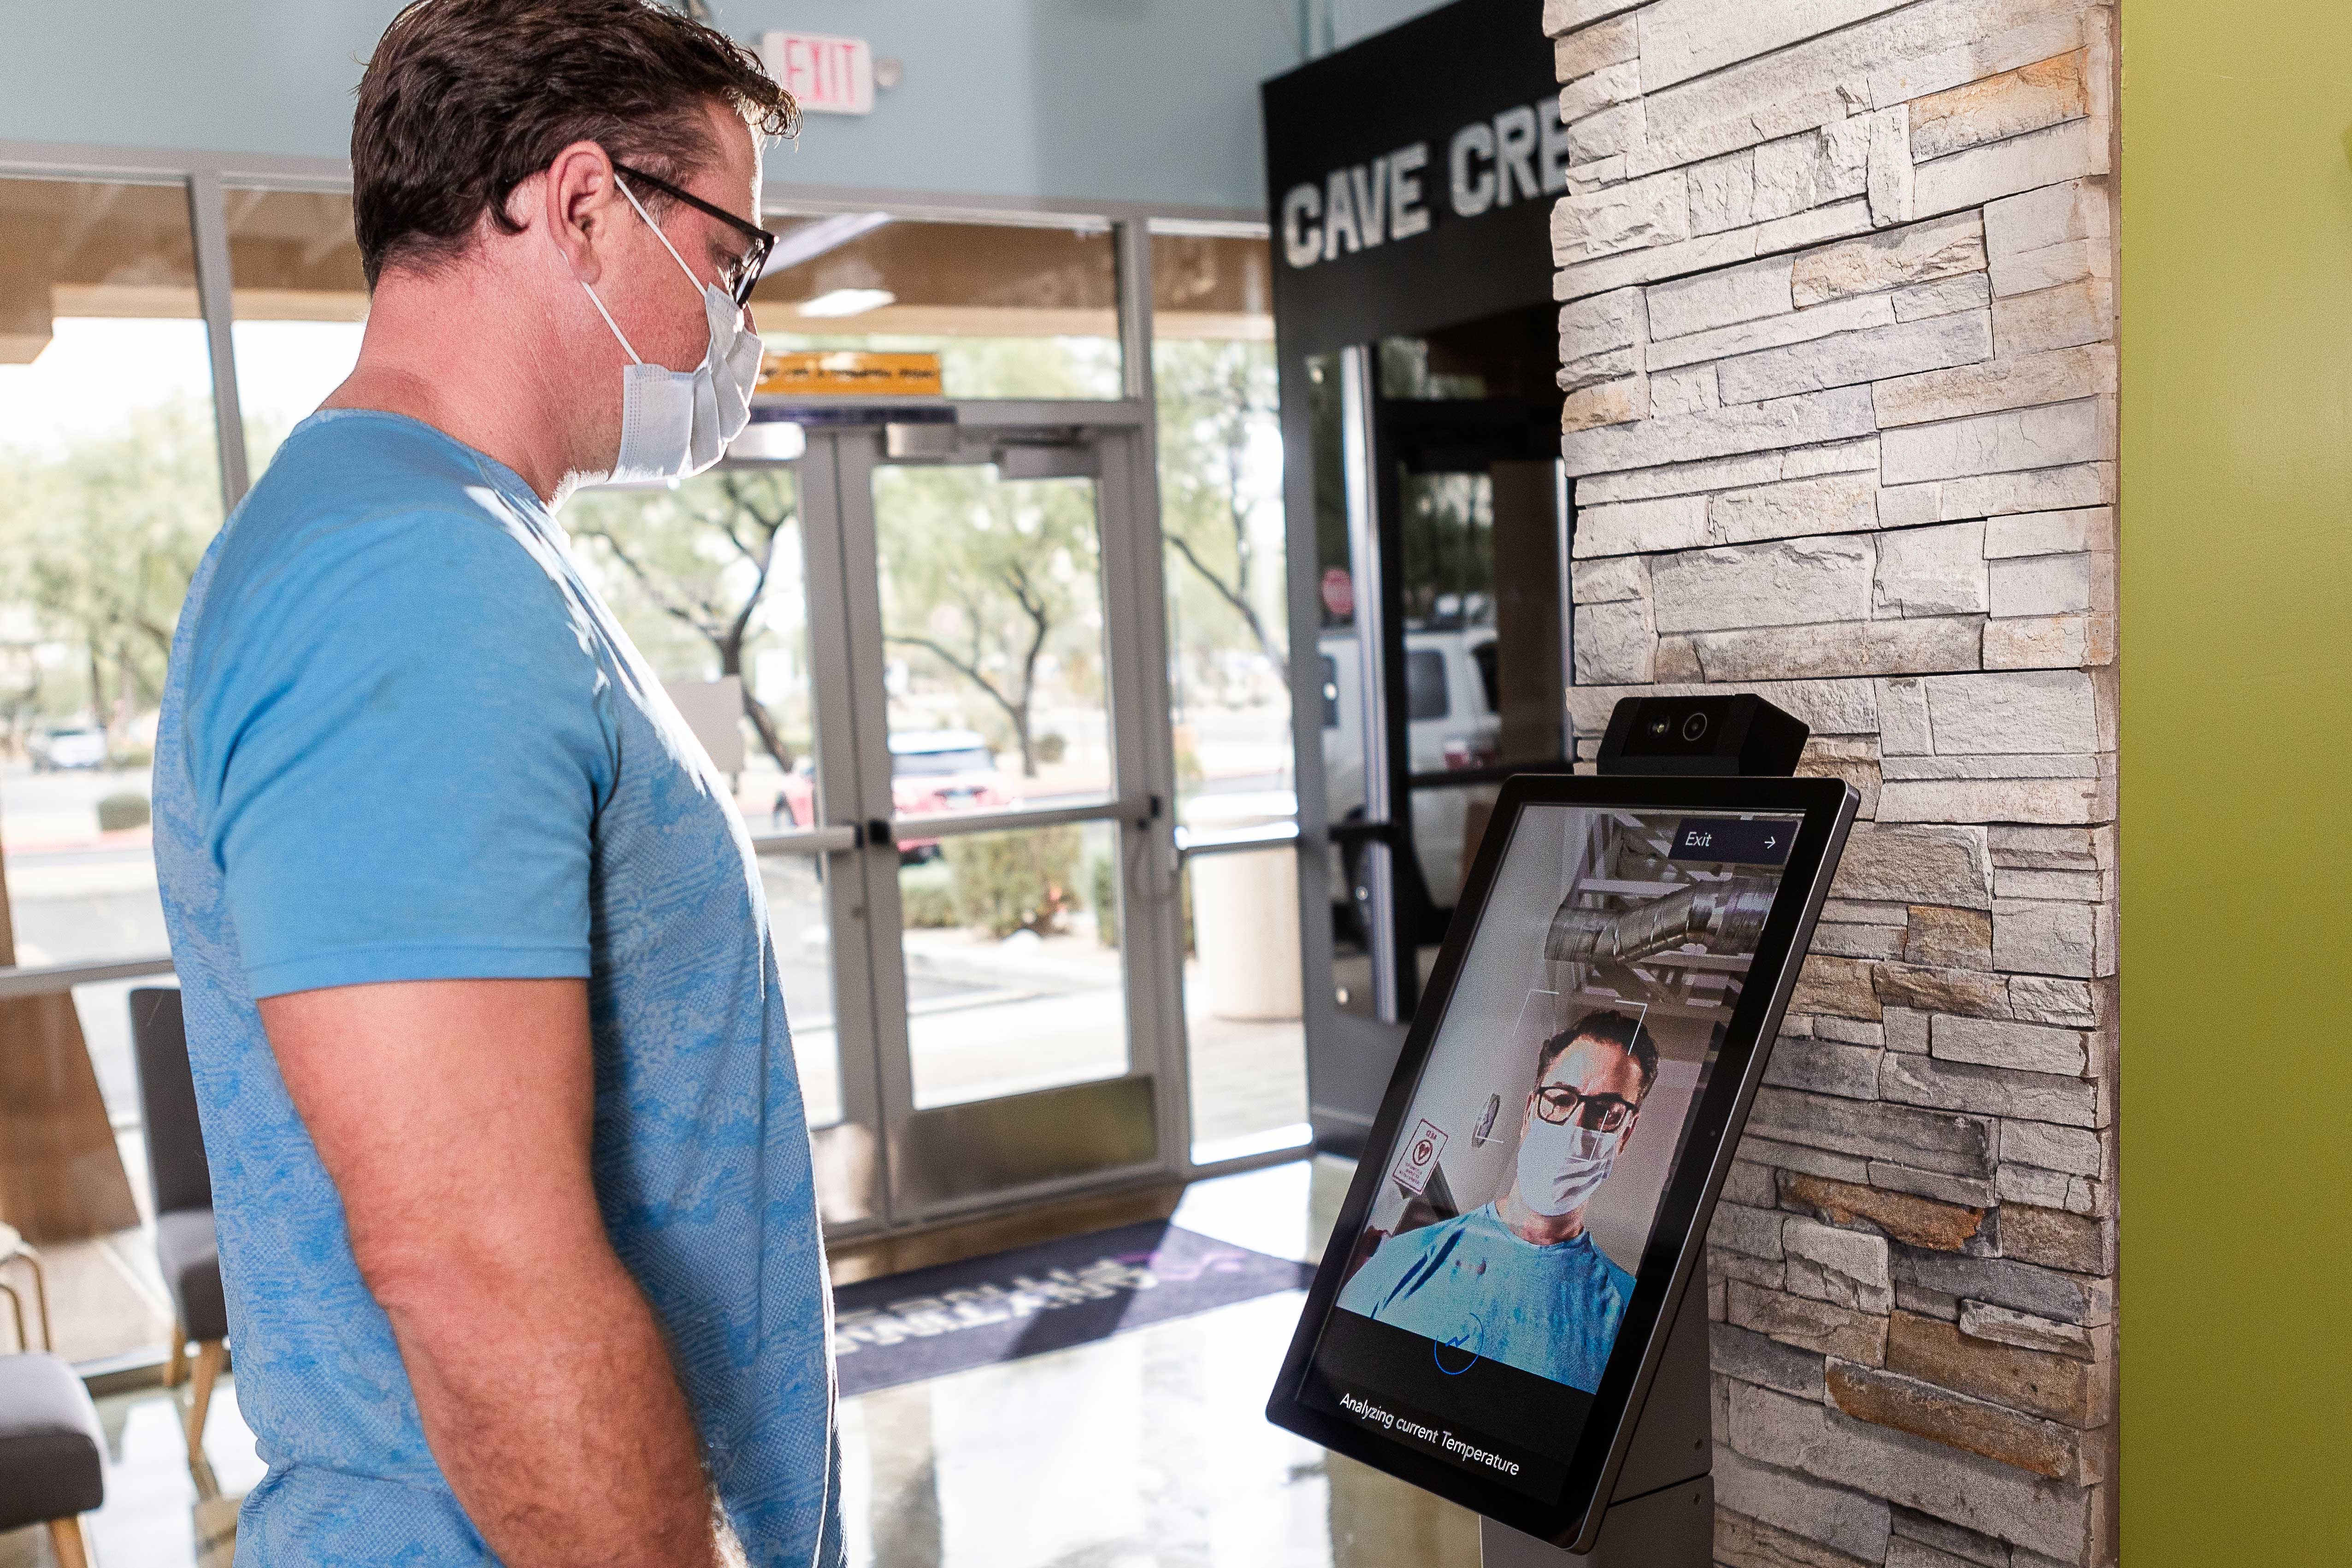 Elo, inventor of the touchscreen, says that attaching biometric cameras to their kiosks is easy and can help expedite everything from checked luggage to security checkpoints.